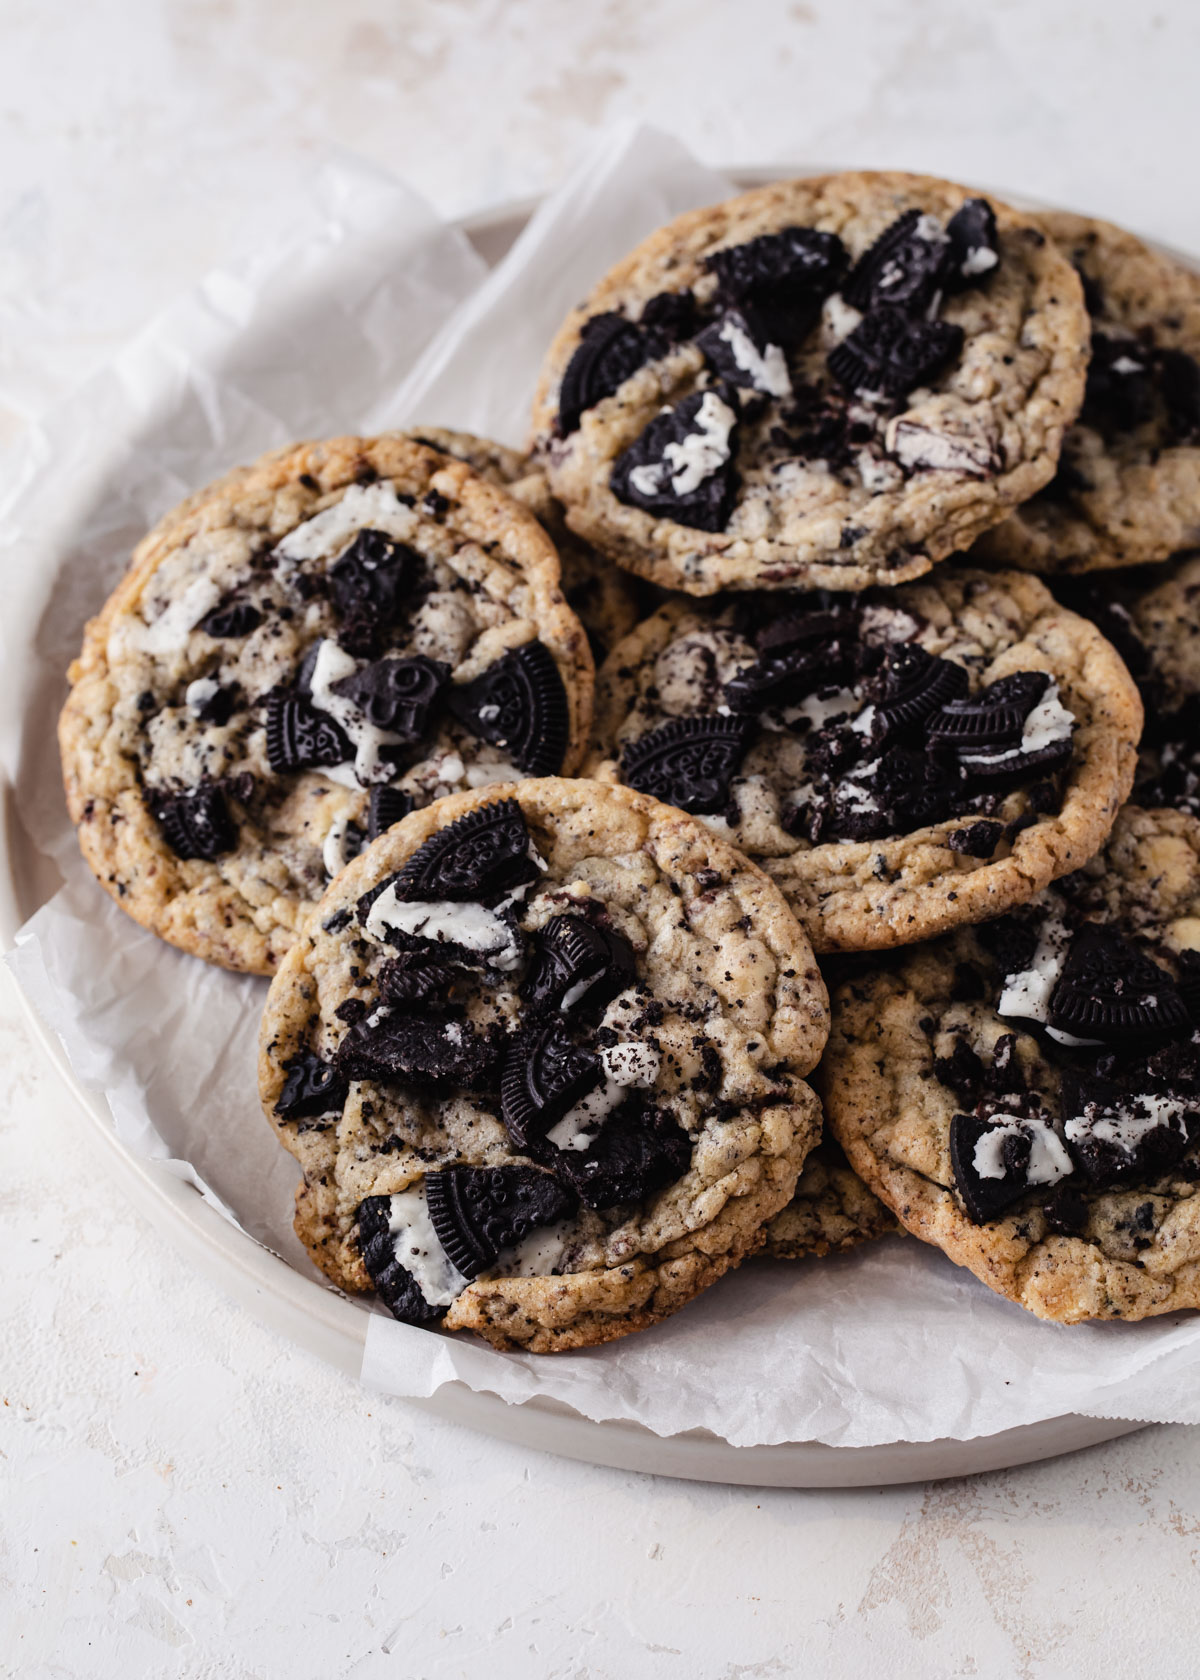 A platter of baked Oreo chocolate chip cookies